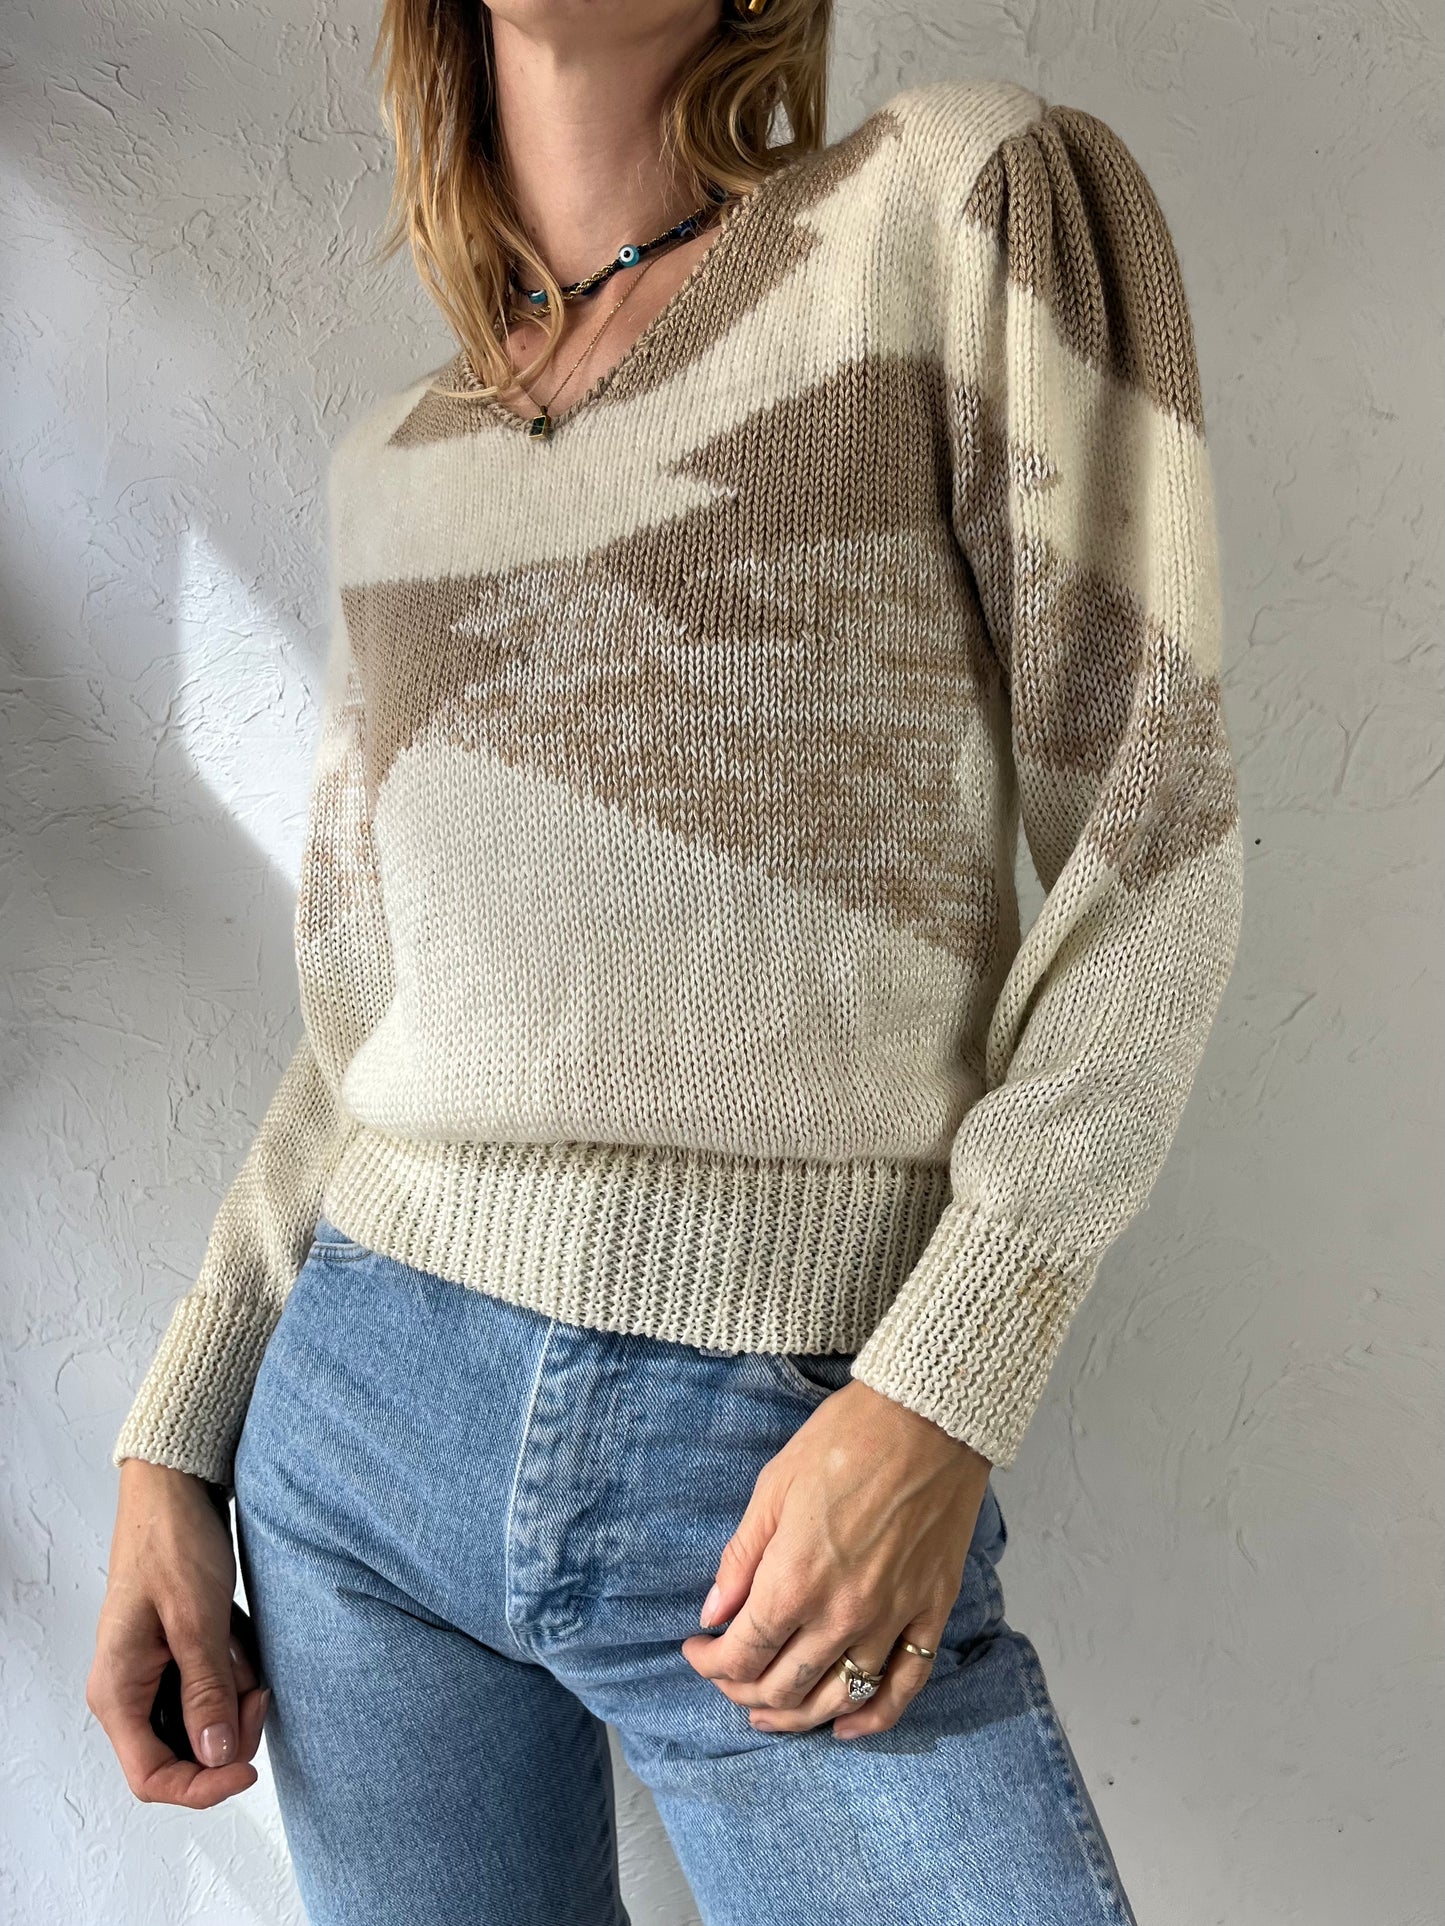 90s 'Woodwards' Beige and White Knit Sweater / Small